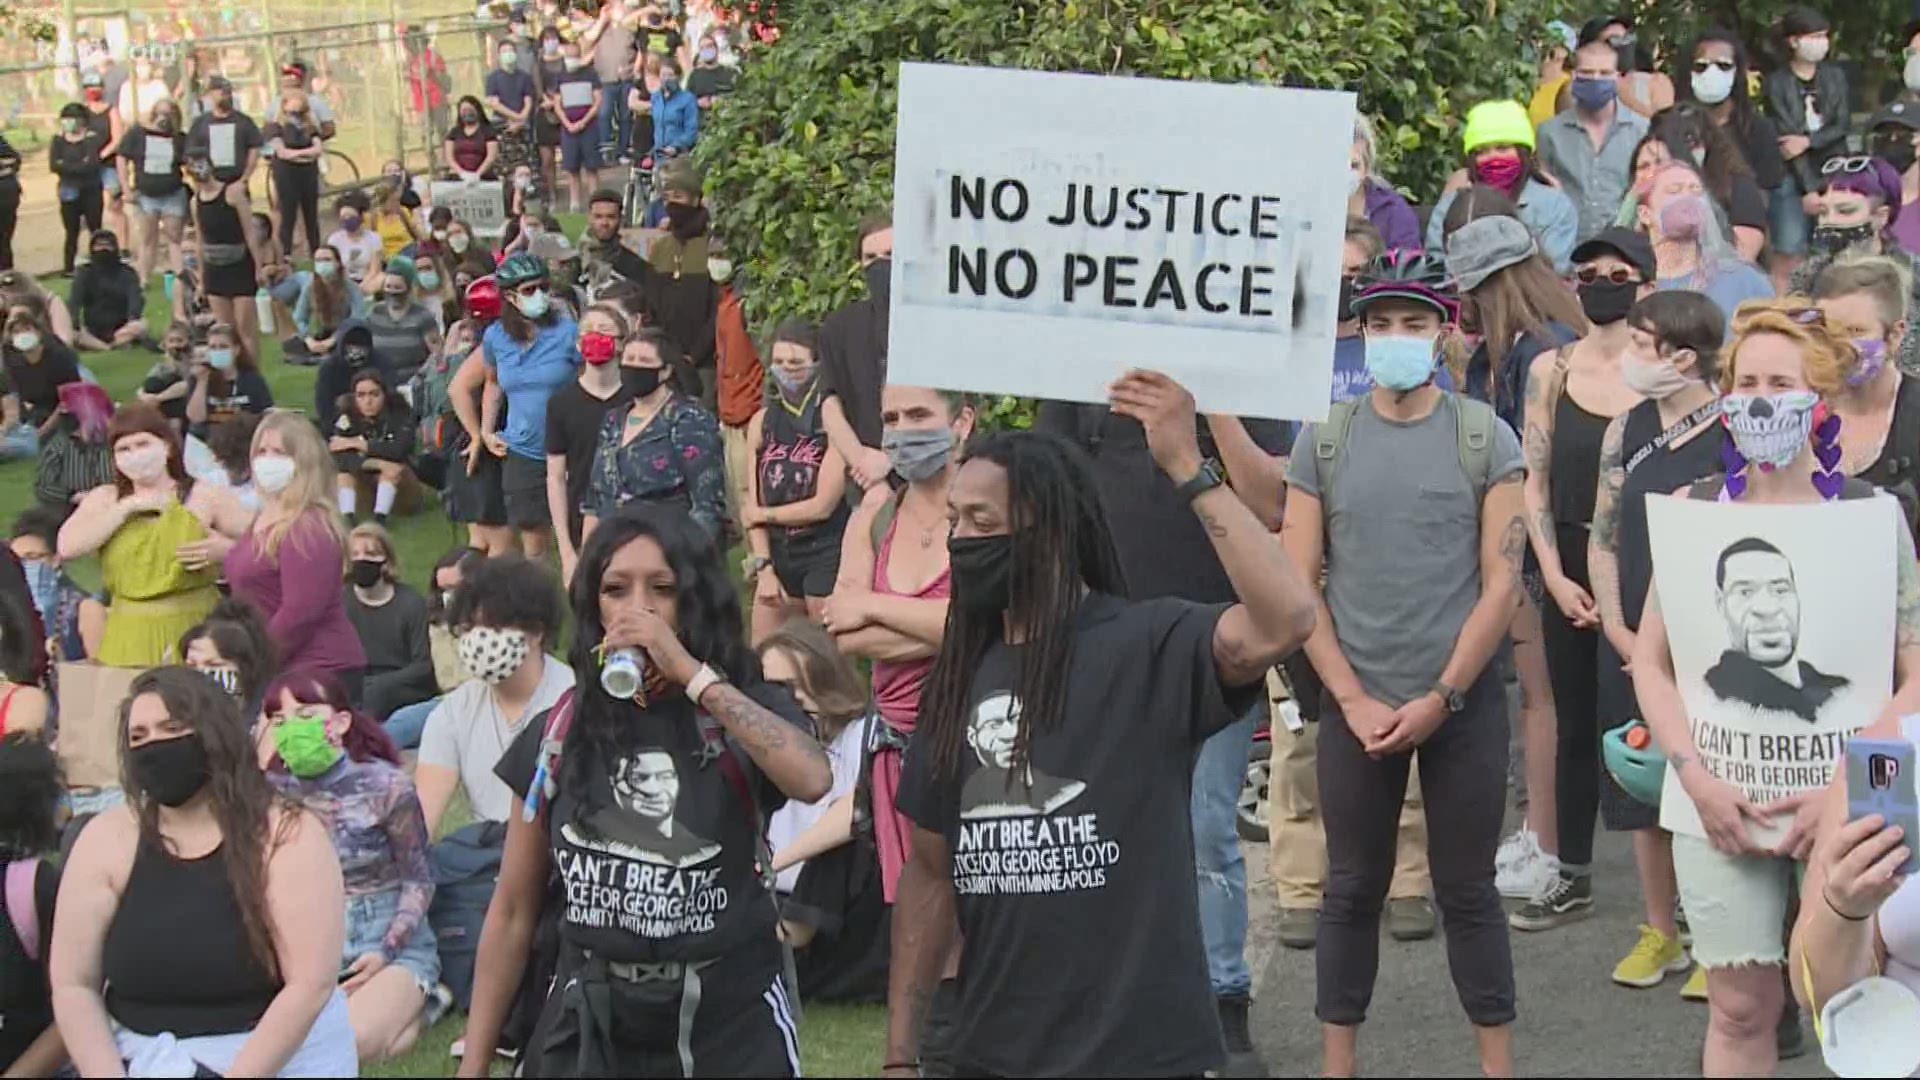 Demonstrators are marching through the streets of Portland in protest of the death of George Floyd.